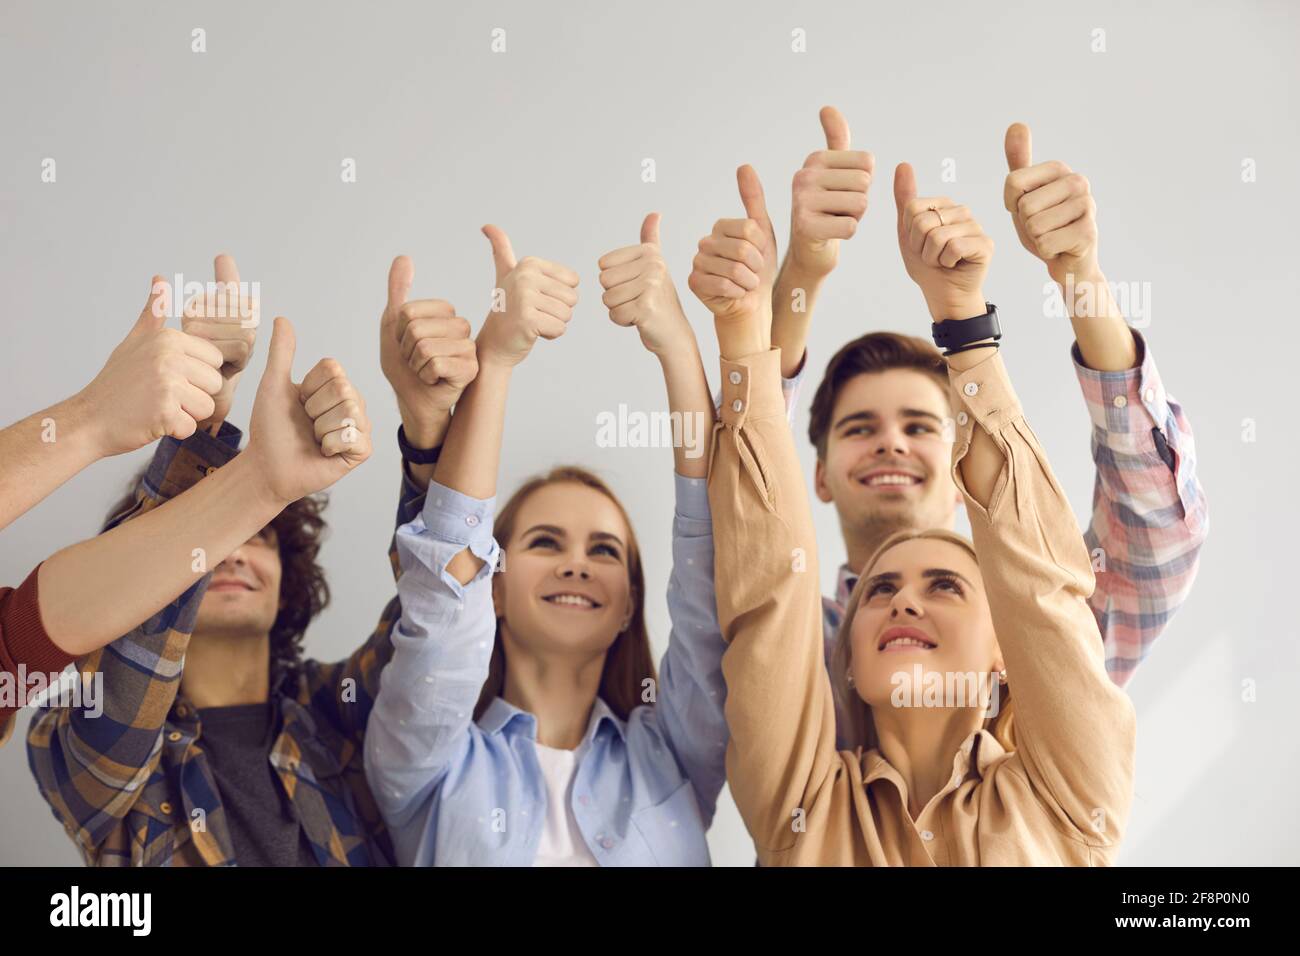 Group of smiling young people raising hands in air and giving thumbs-up all together Stock Photo